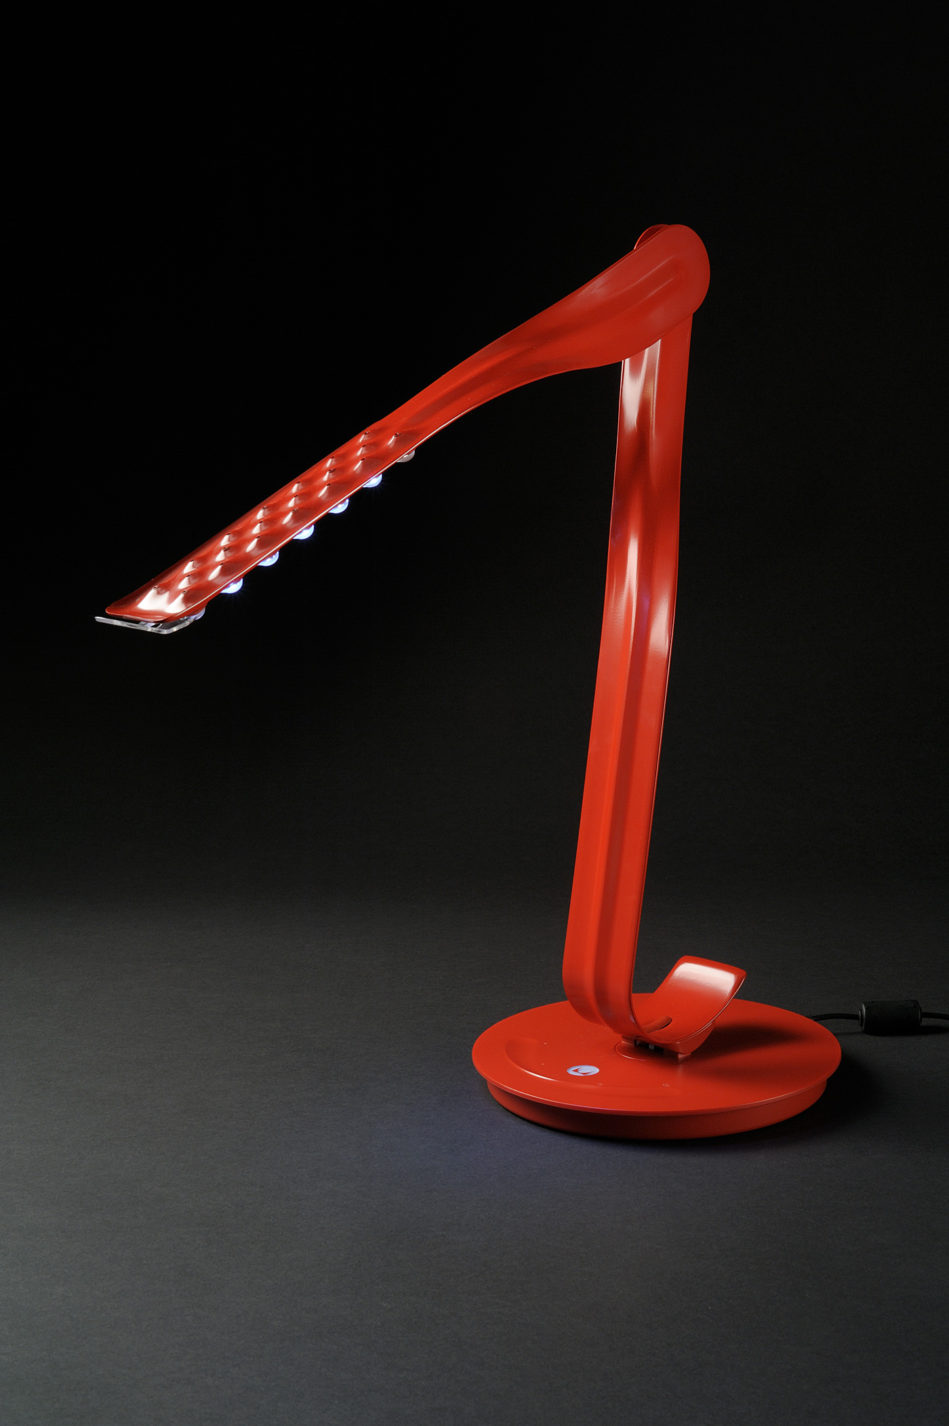 Bright red LED lamp. Two bent strips of metal connect at a movable joint to form the body and arm above a circular base.